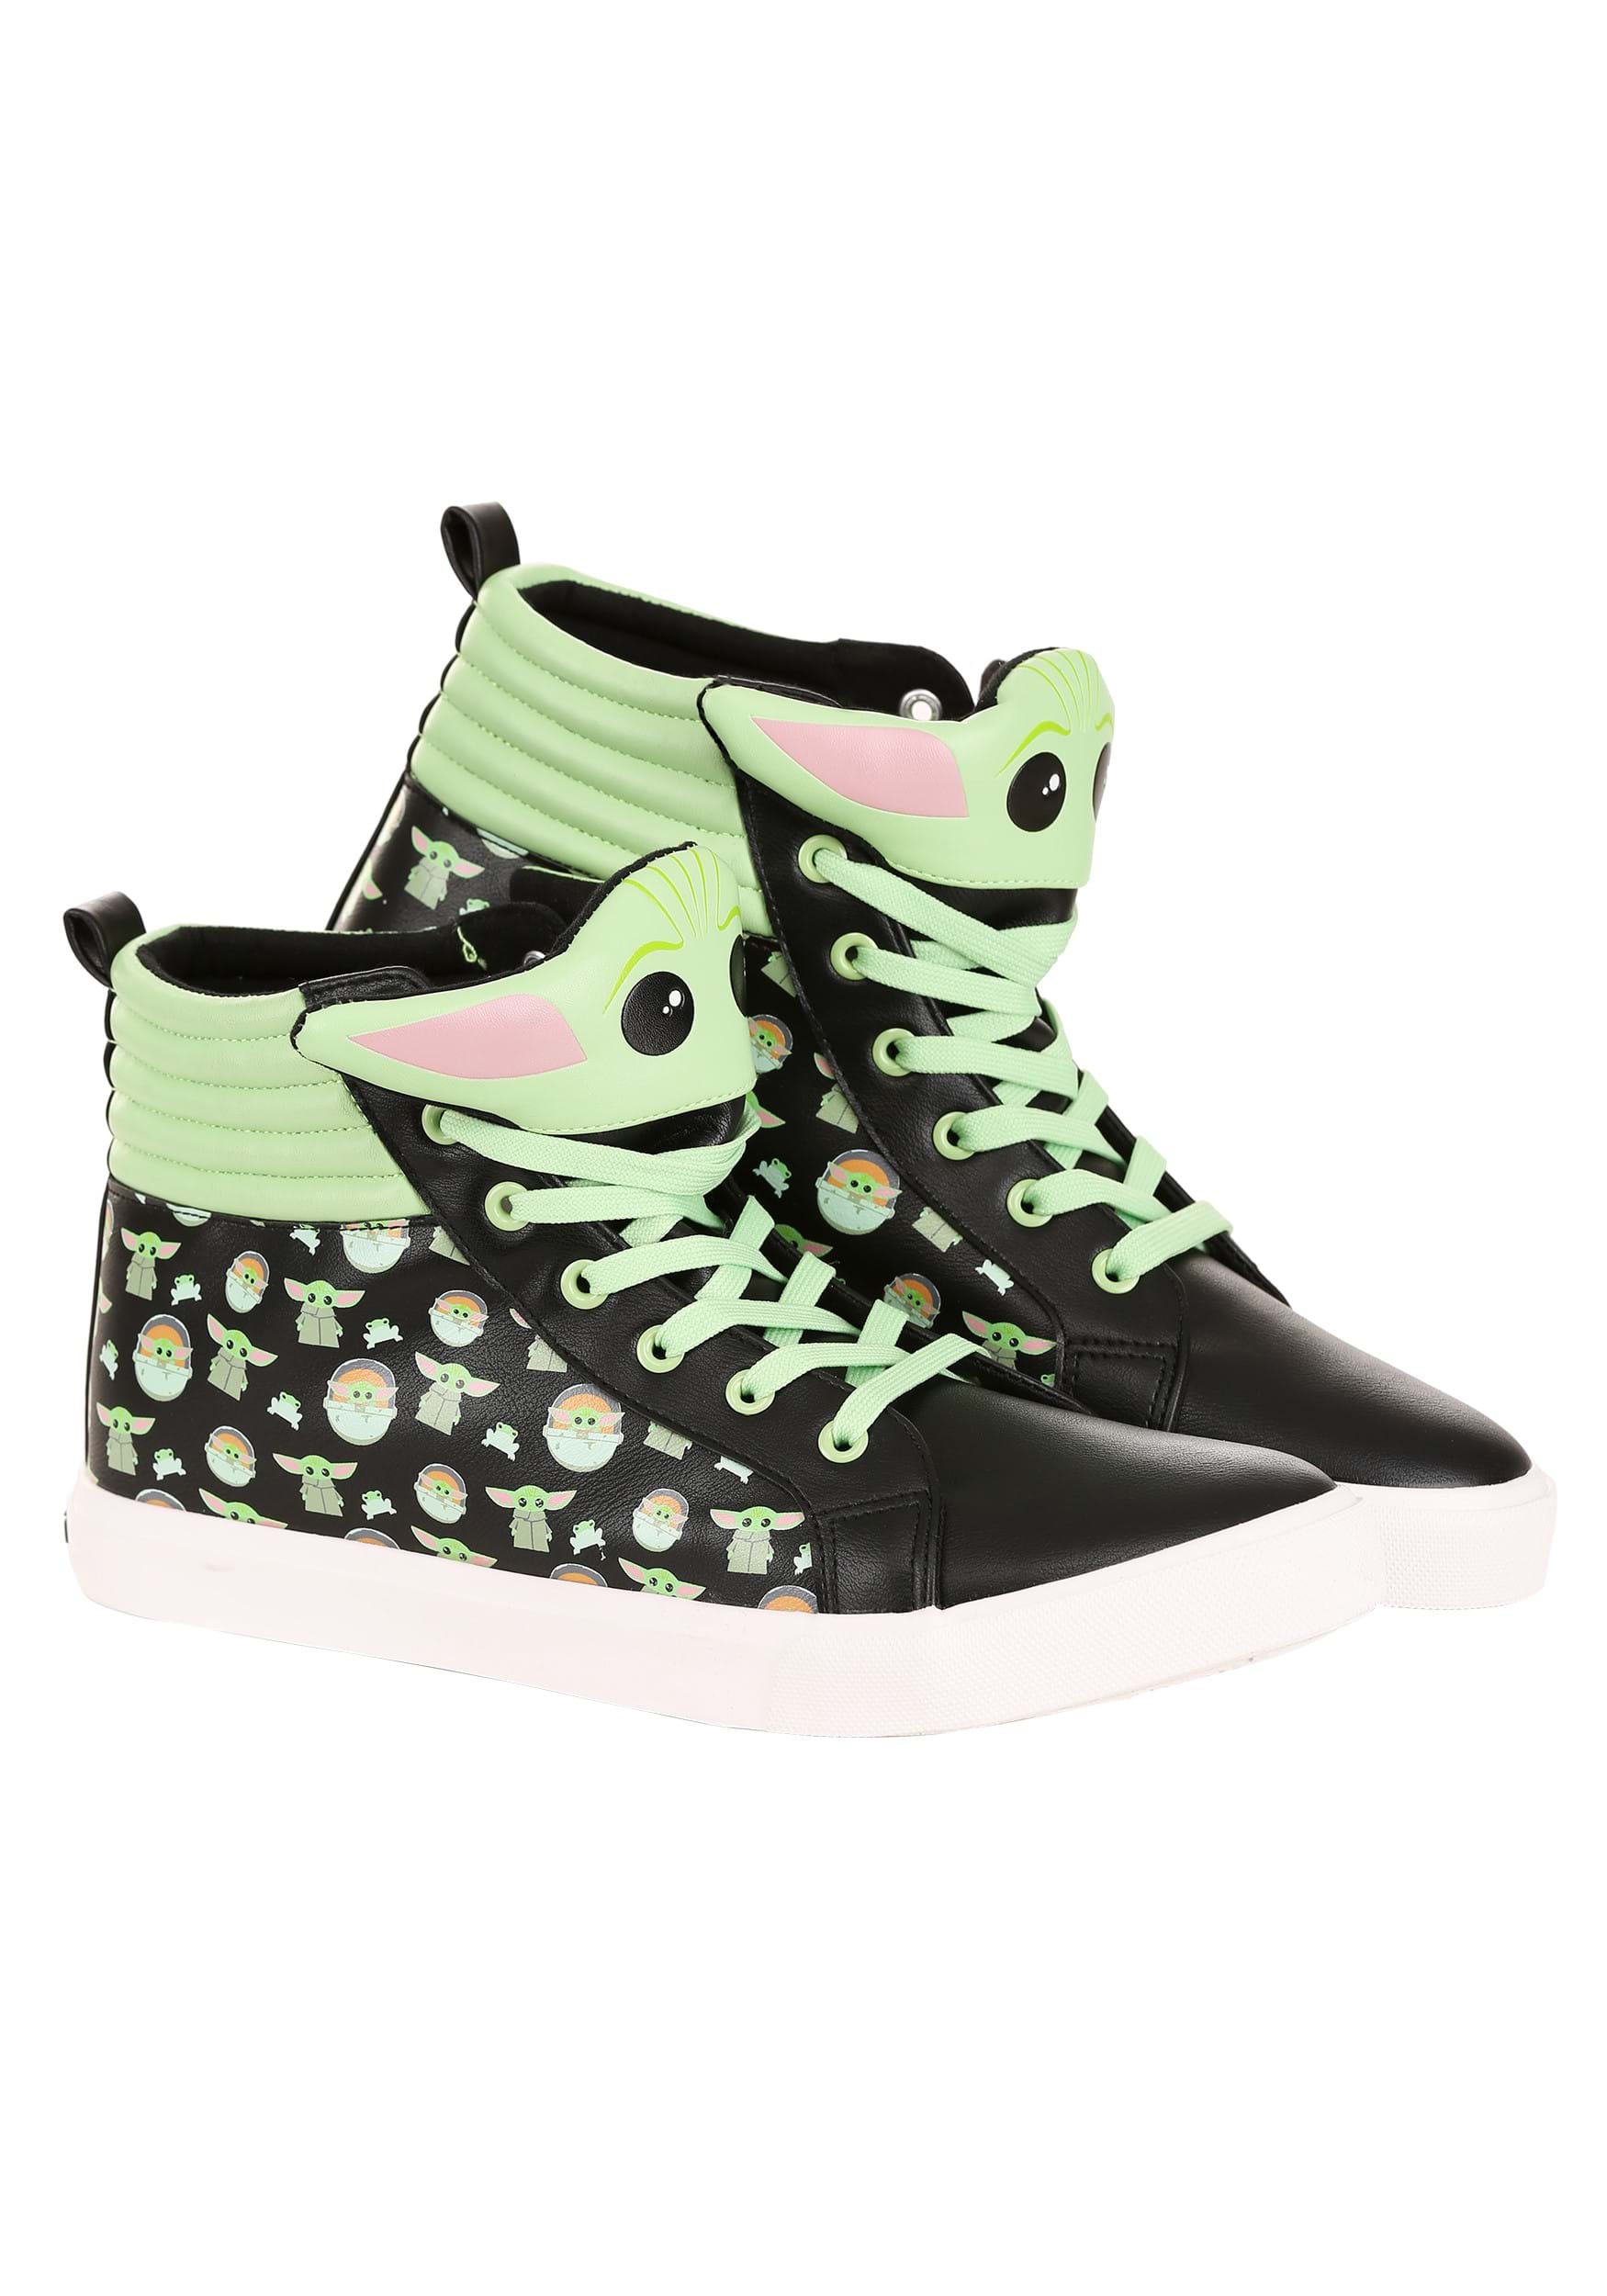 Step Into Galactic Style With These Fun Baby Yoda Sneakers